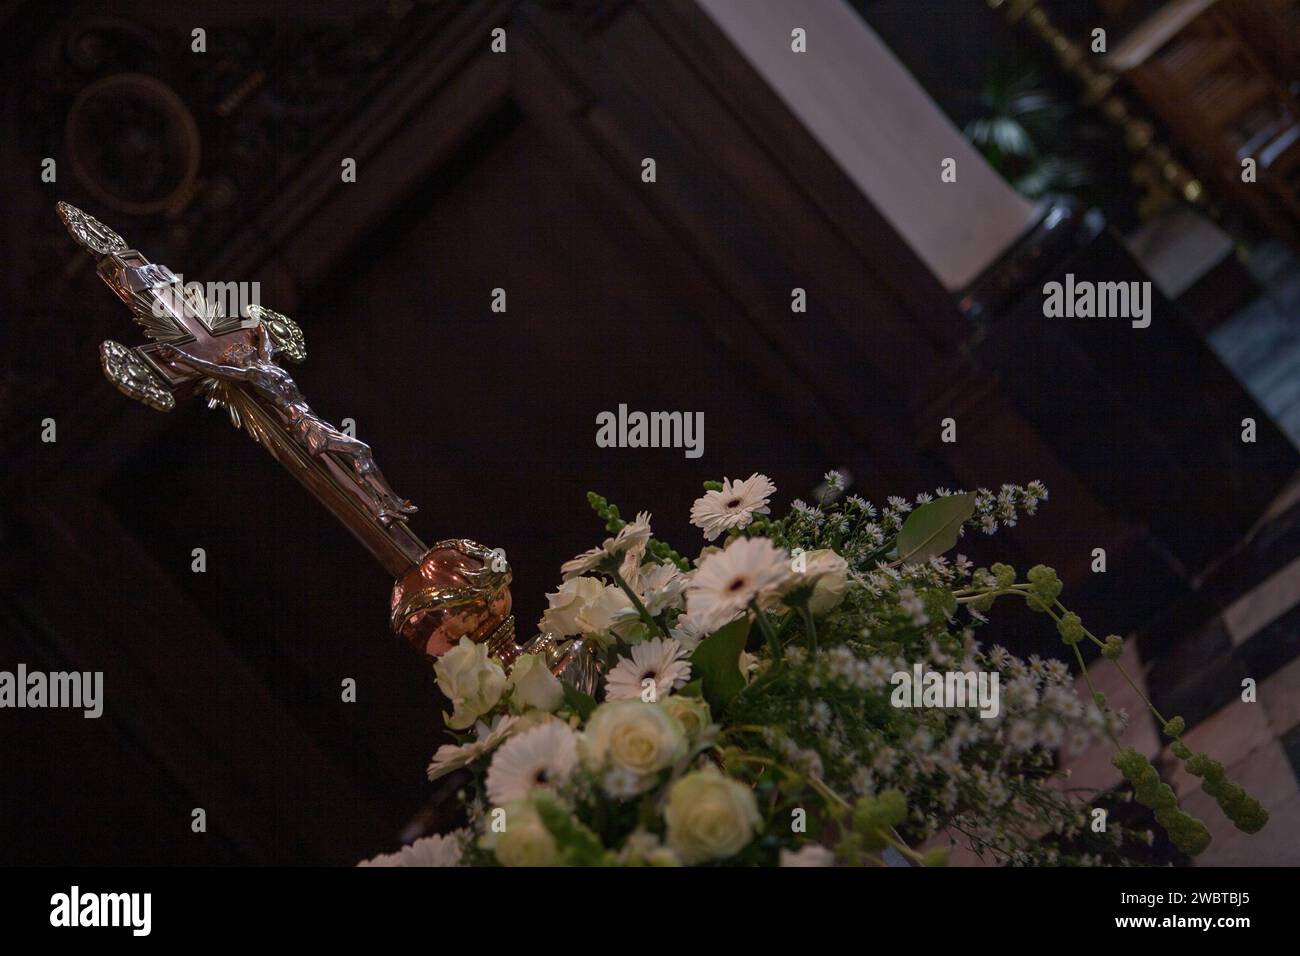 The image captures a powerful religious symbol, a metallic cross, rising above a spray of white flowers, possibly during a solemn church service or ceremony. The cross, with its intricate design, gleams with a reflective sheen, suggesting it is made of brass or a similar material. It stands out against the dark wooden backdrop, typical of a church's rich interior. The flowers, likely part of an altar arrangement, bring a soft, peaceful contrast to the metallic strength of the cross. Sacred Symbolism: The Cross Amidst Floral Peace. High quality photo Stock Photo